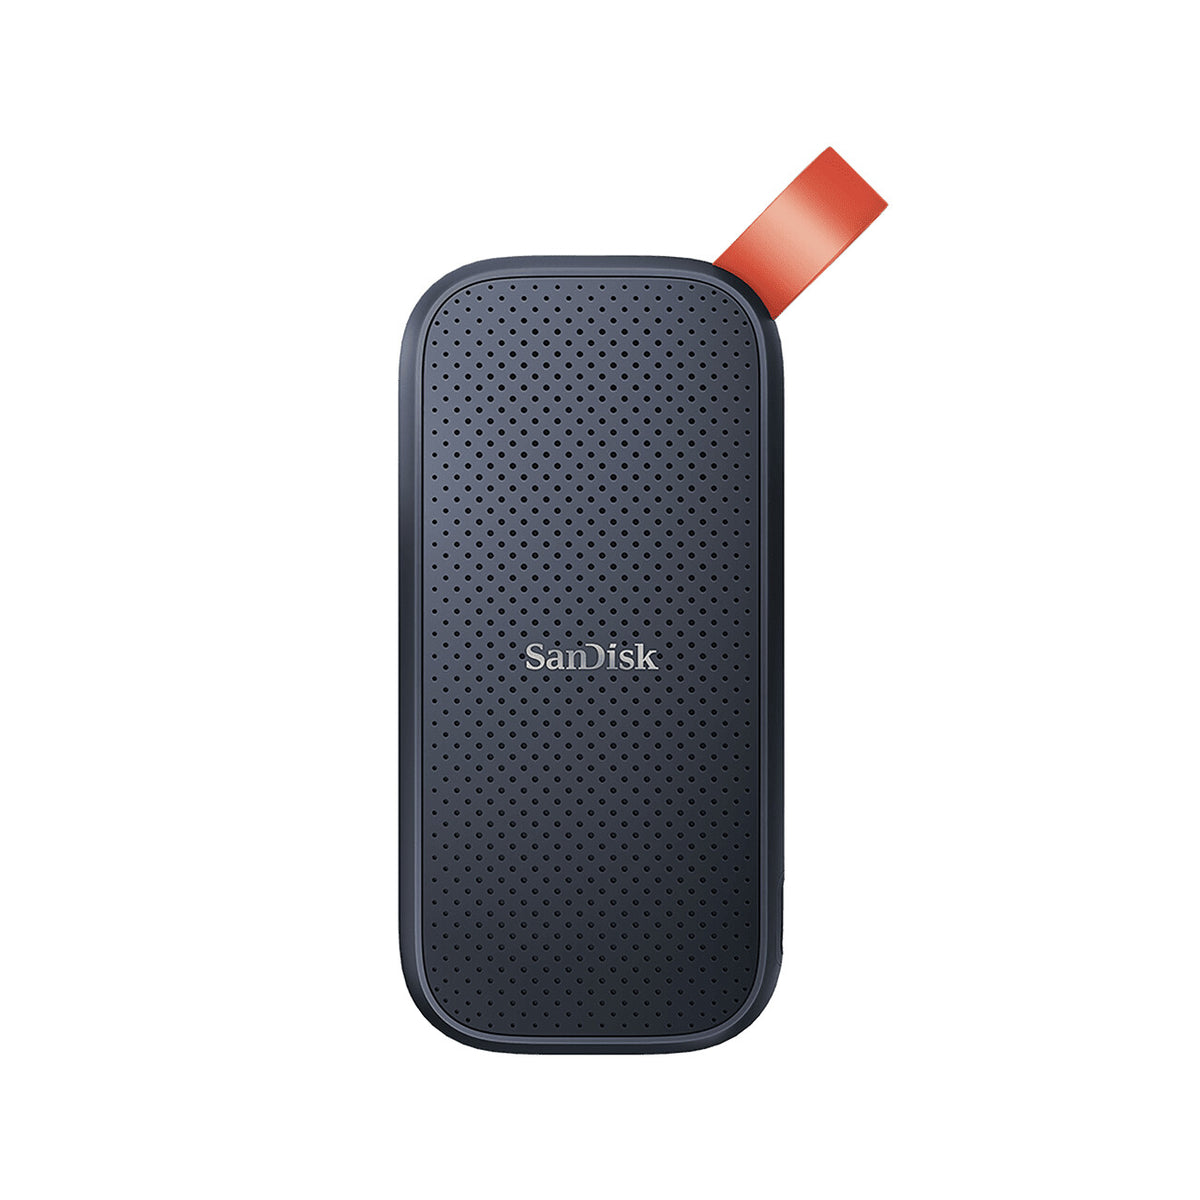 SanDisk Portable External solid state drive in Blue - 480 GB